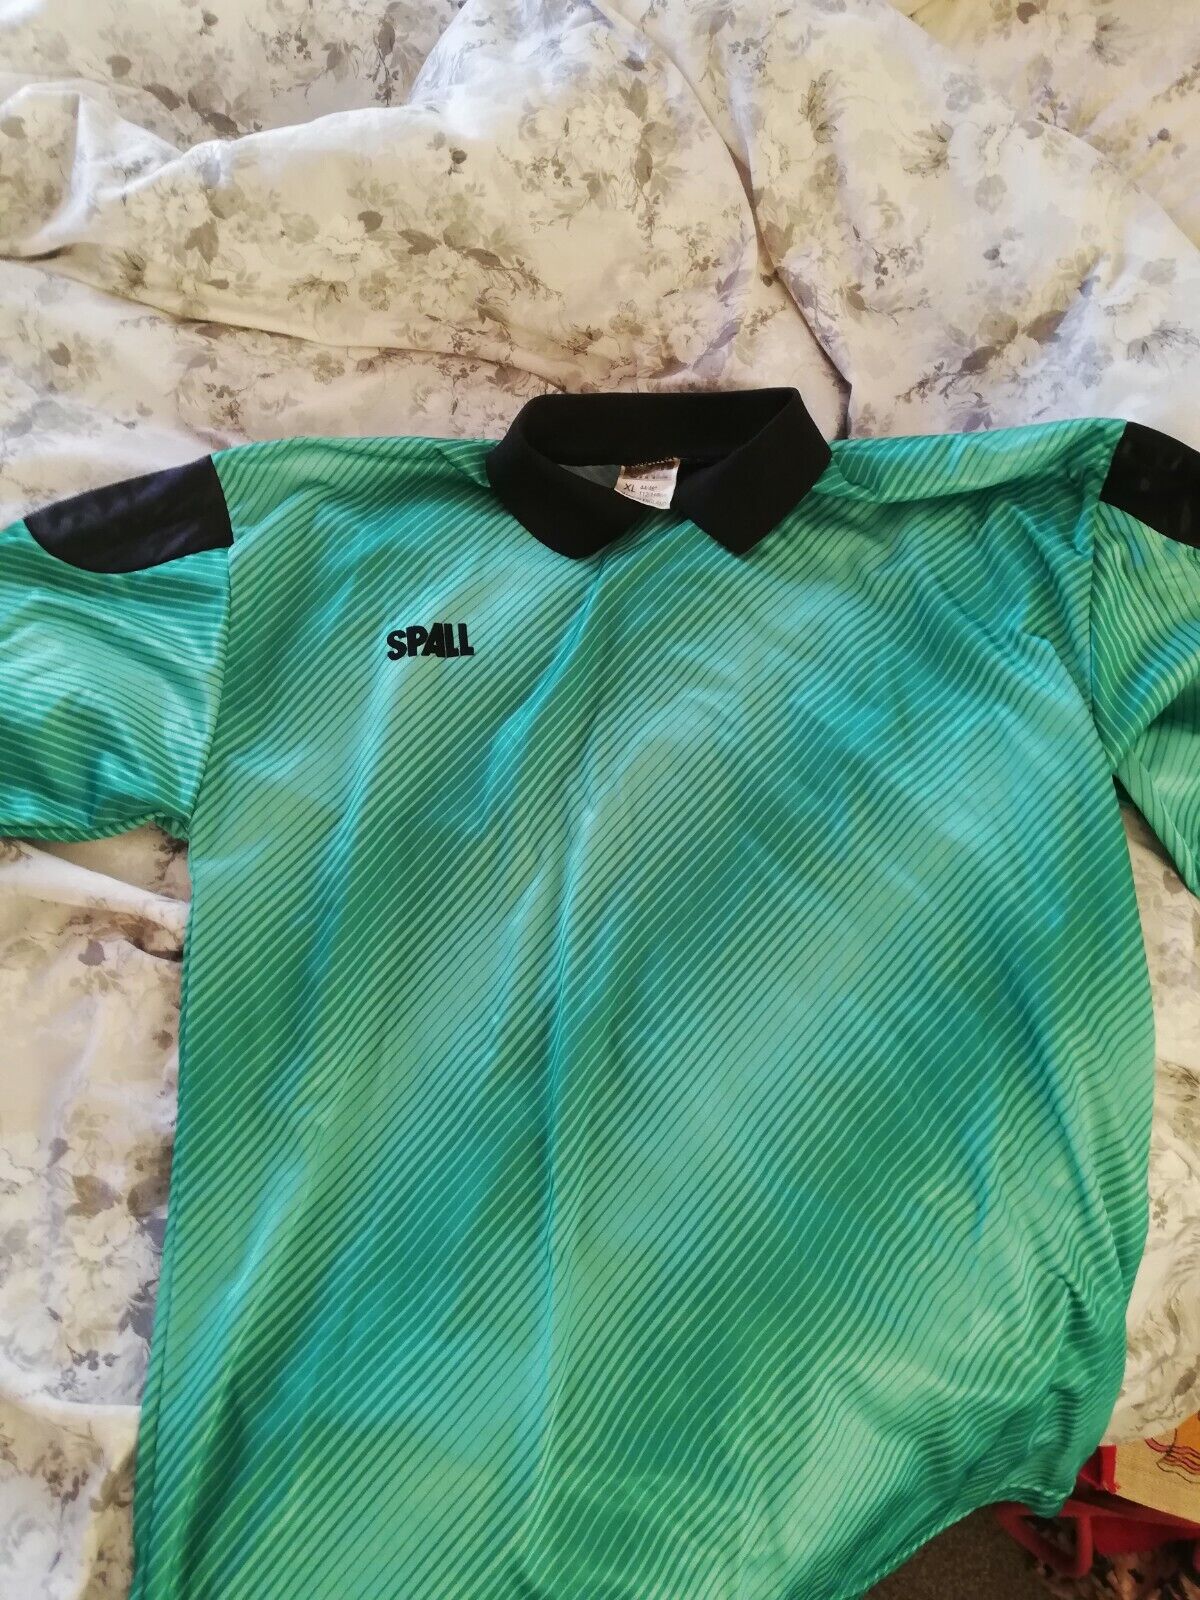 VINTAGE SPALL GOALKEEPERS TOP * SIZE EXTRA LARGE MENS* Popularne najnowsze prace